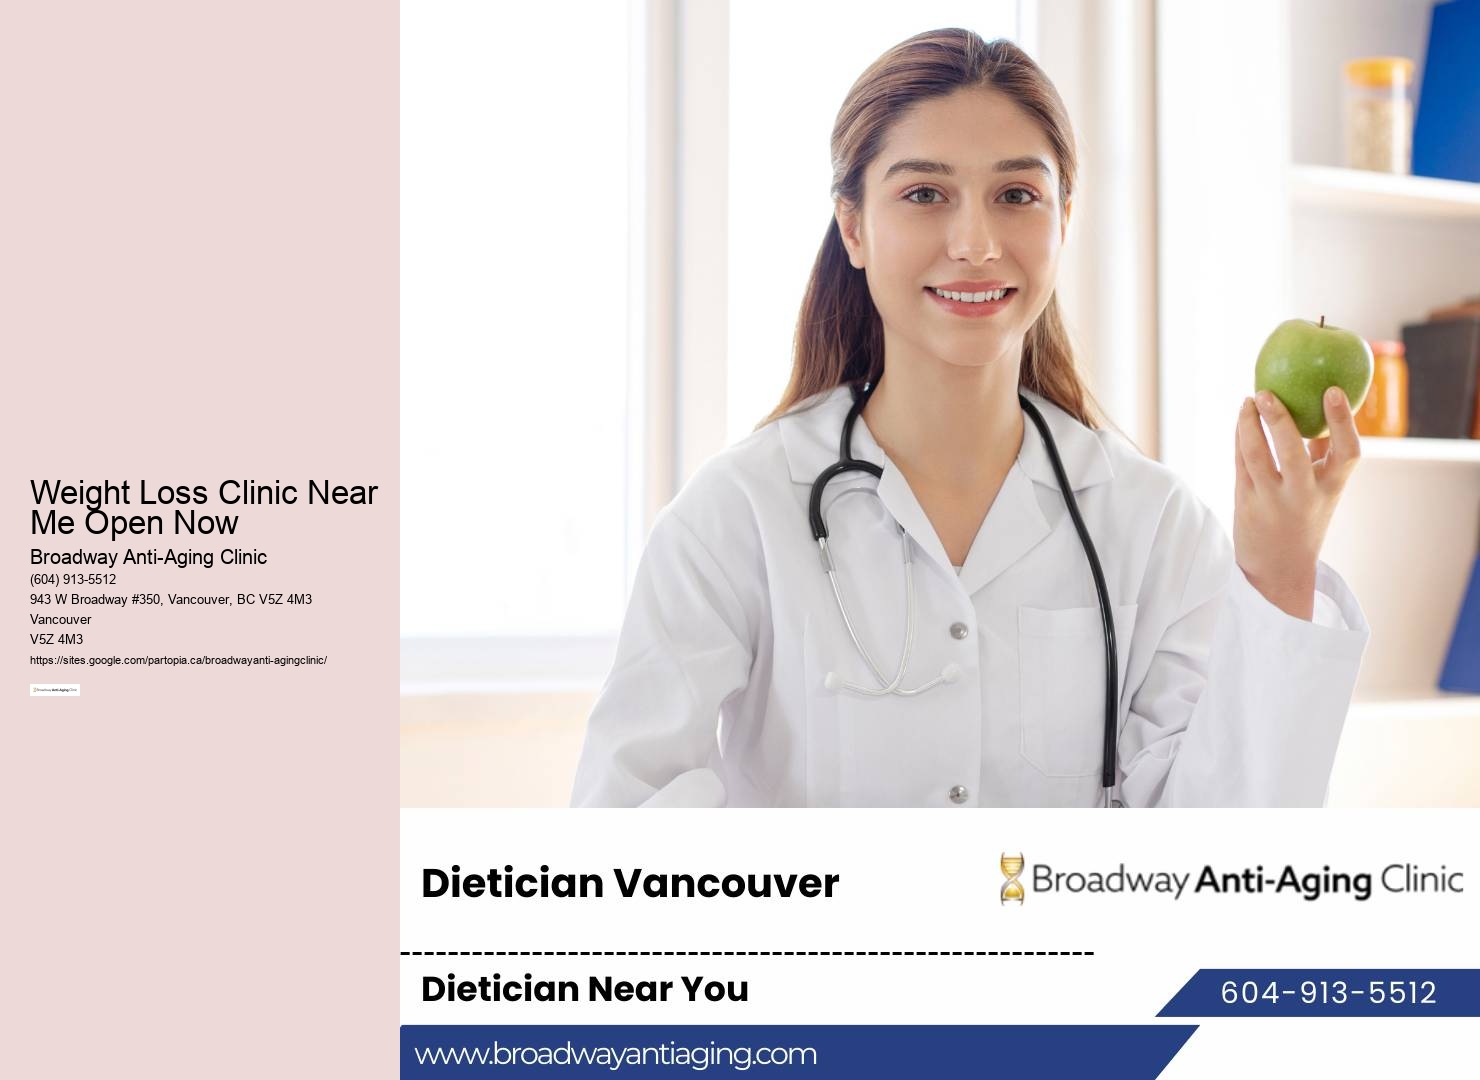 Weight loss clinic Vancouver promotions